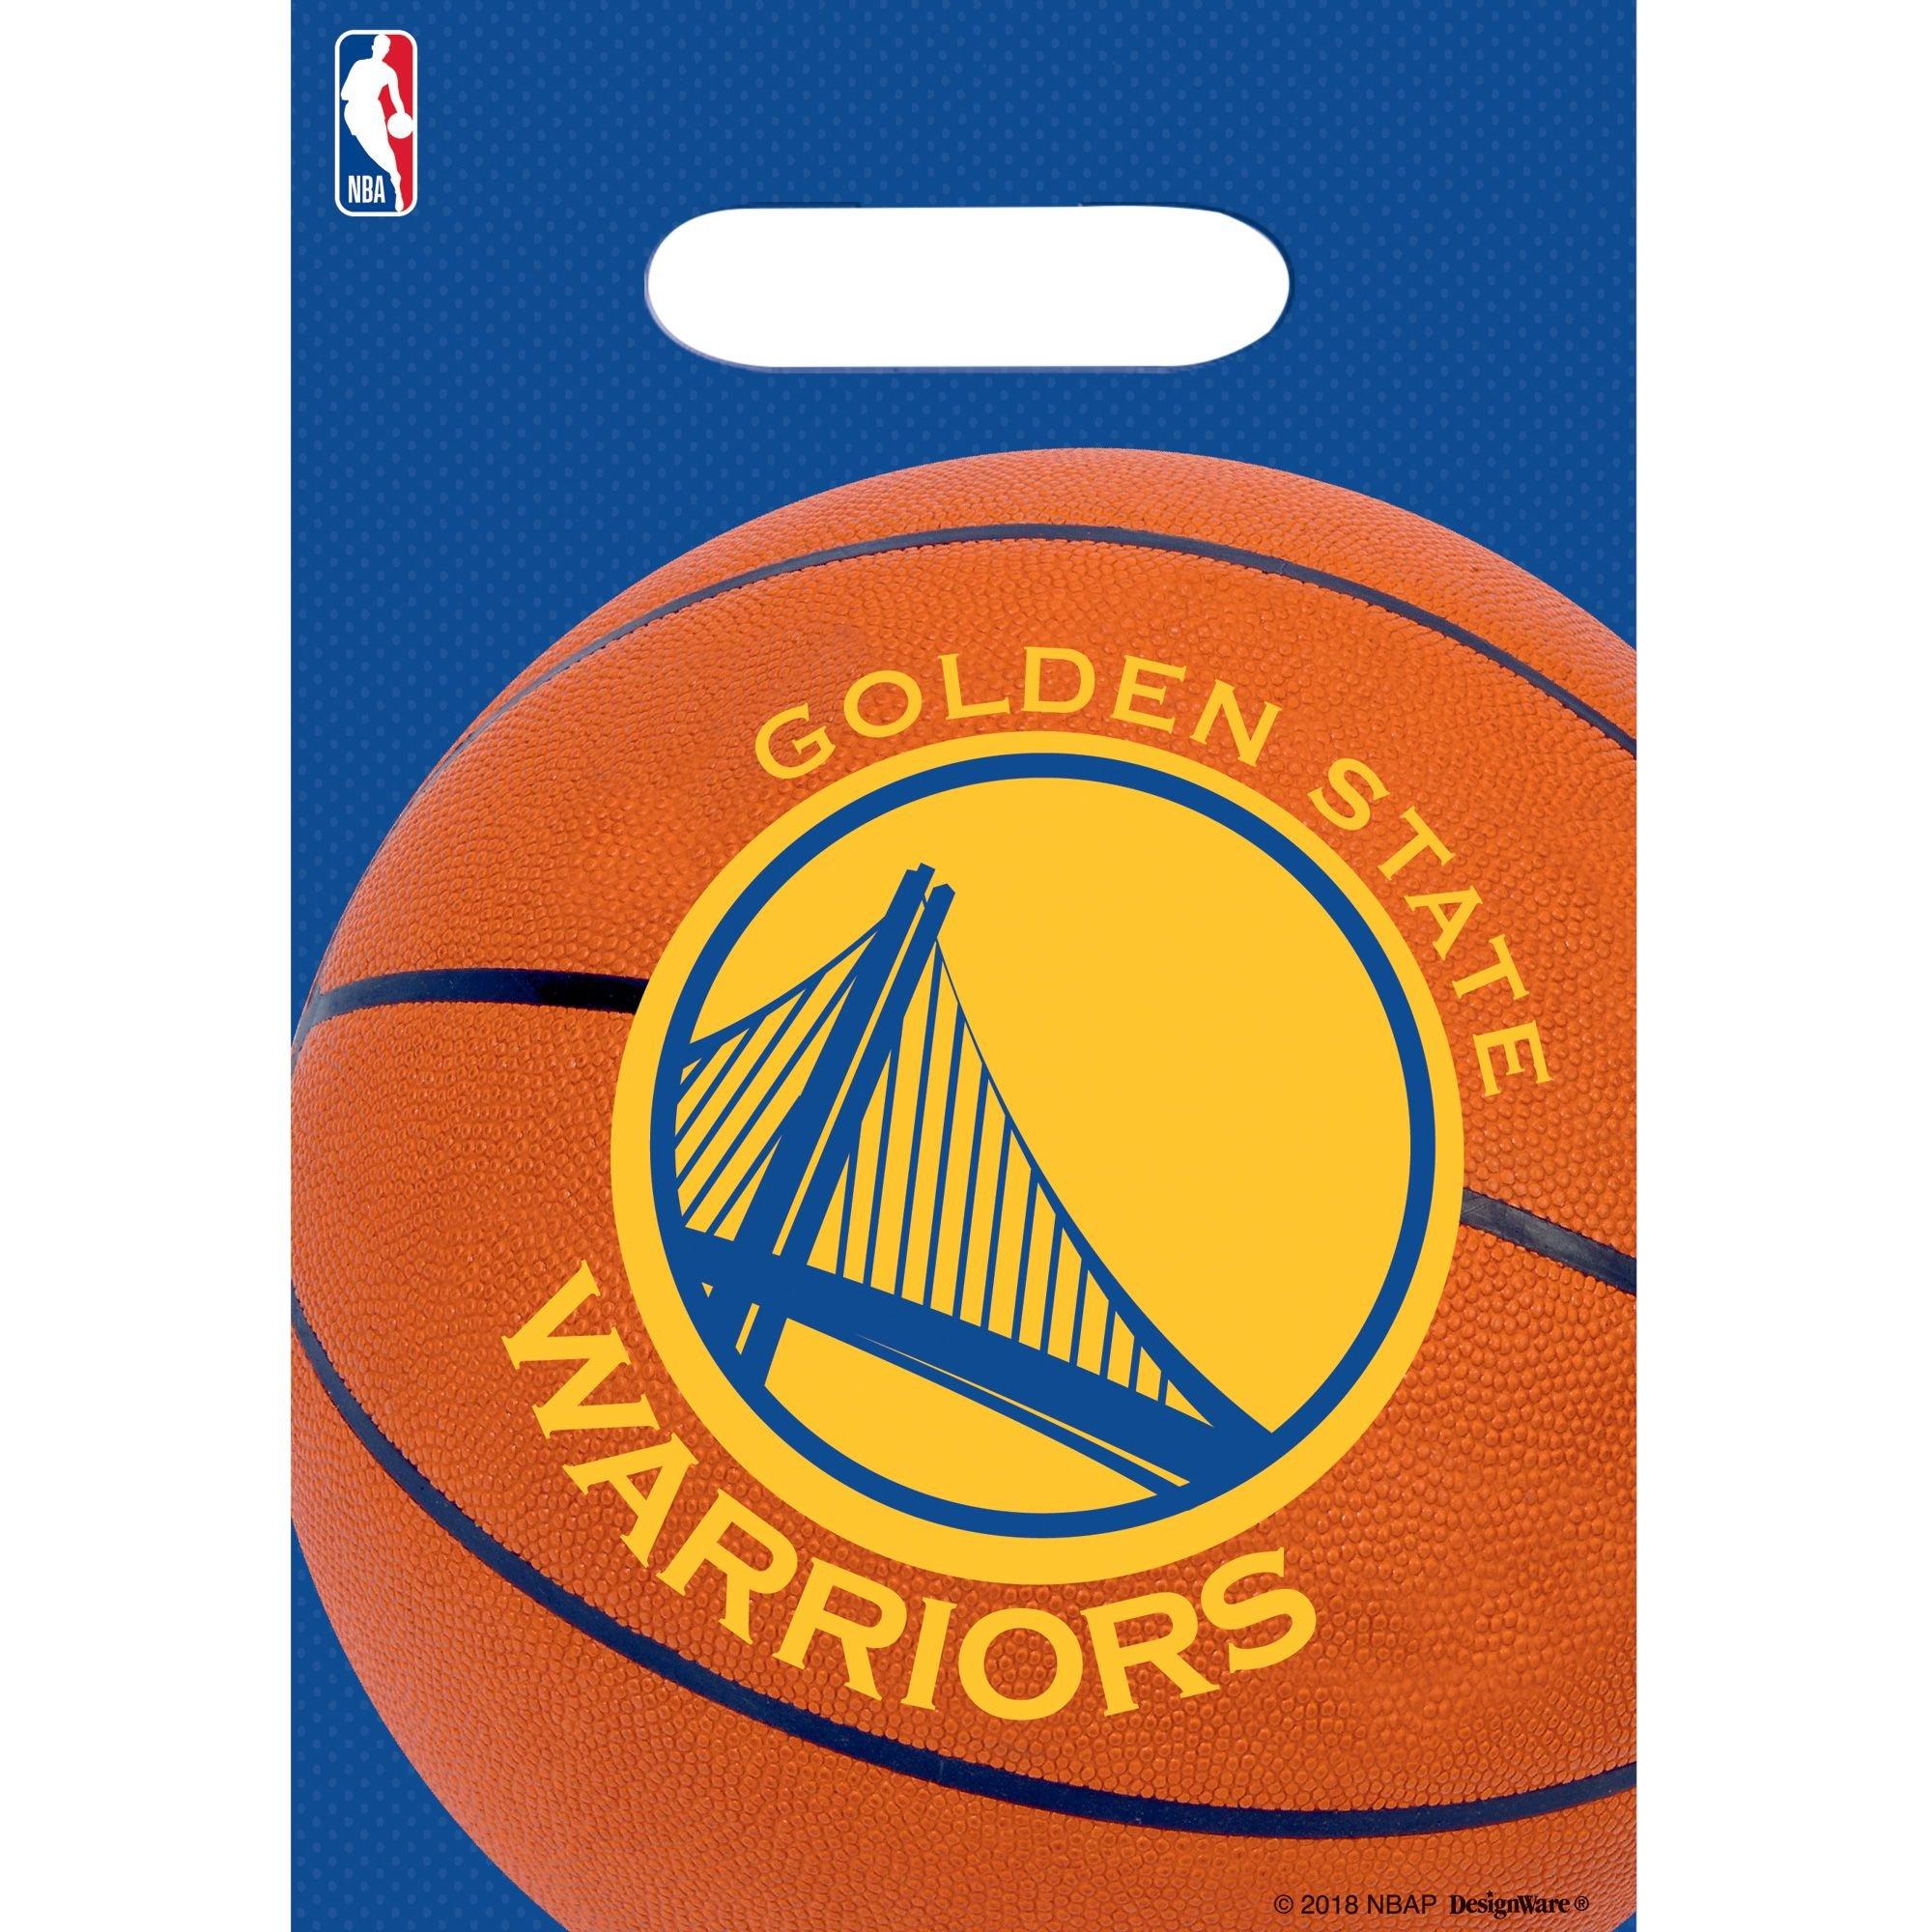 Golden State Warriors Accessories, Warriors Gifts, Jewelry, Phone Cases